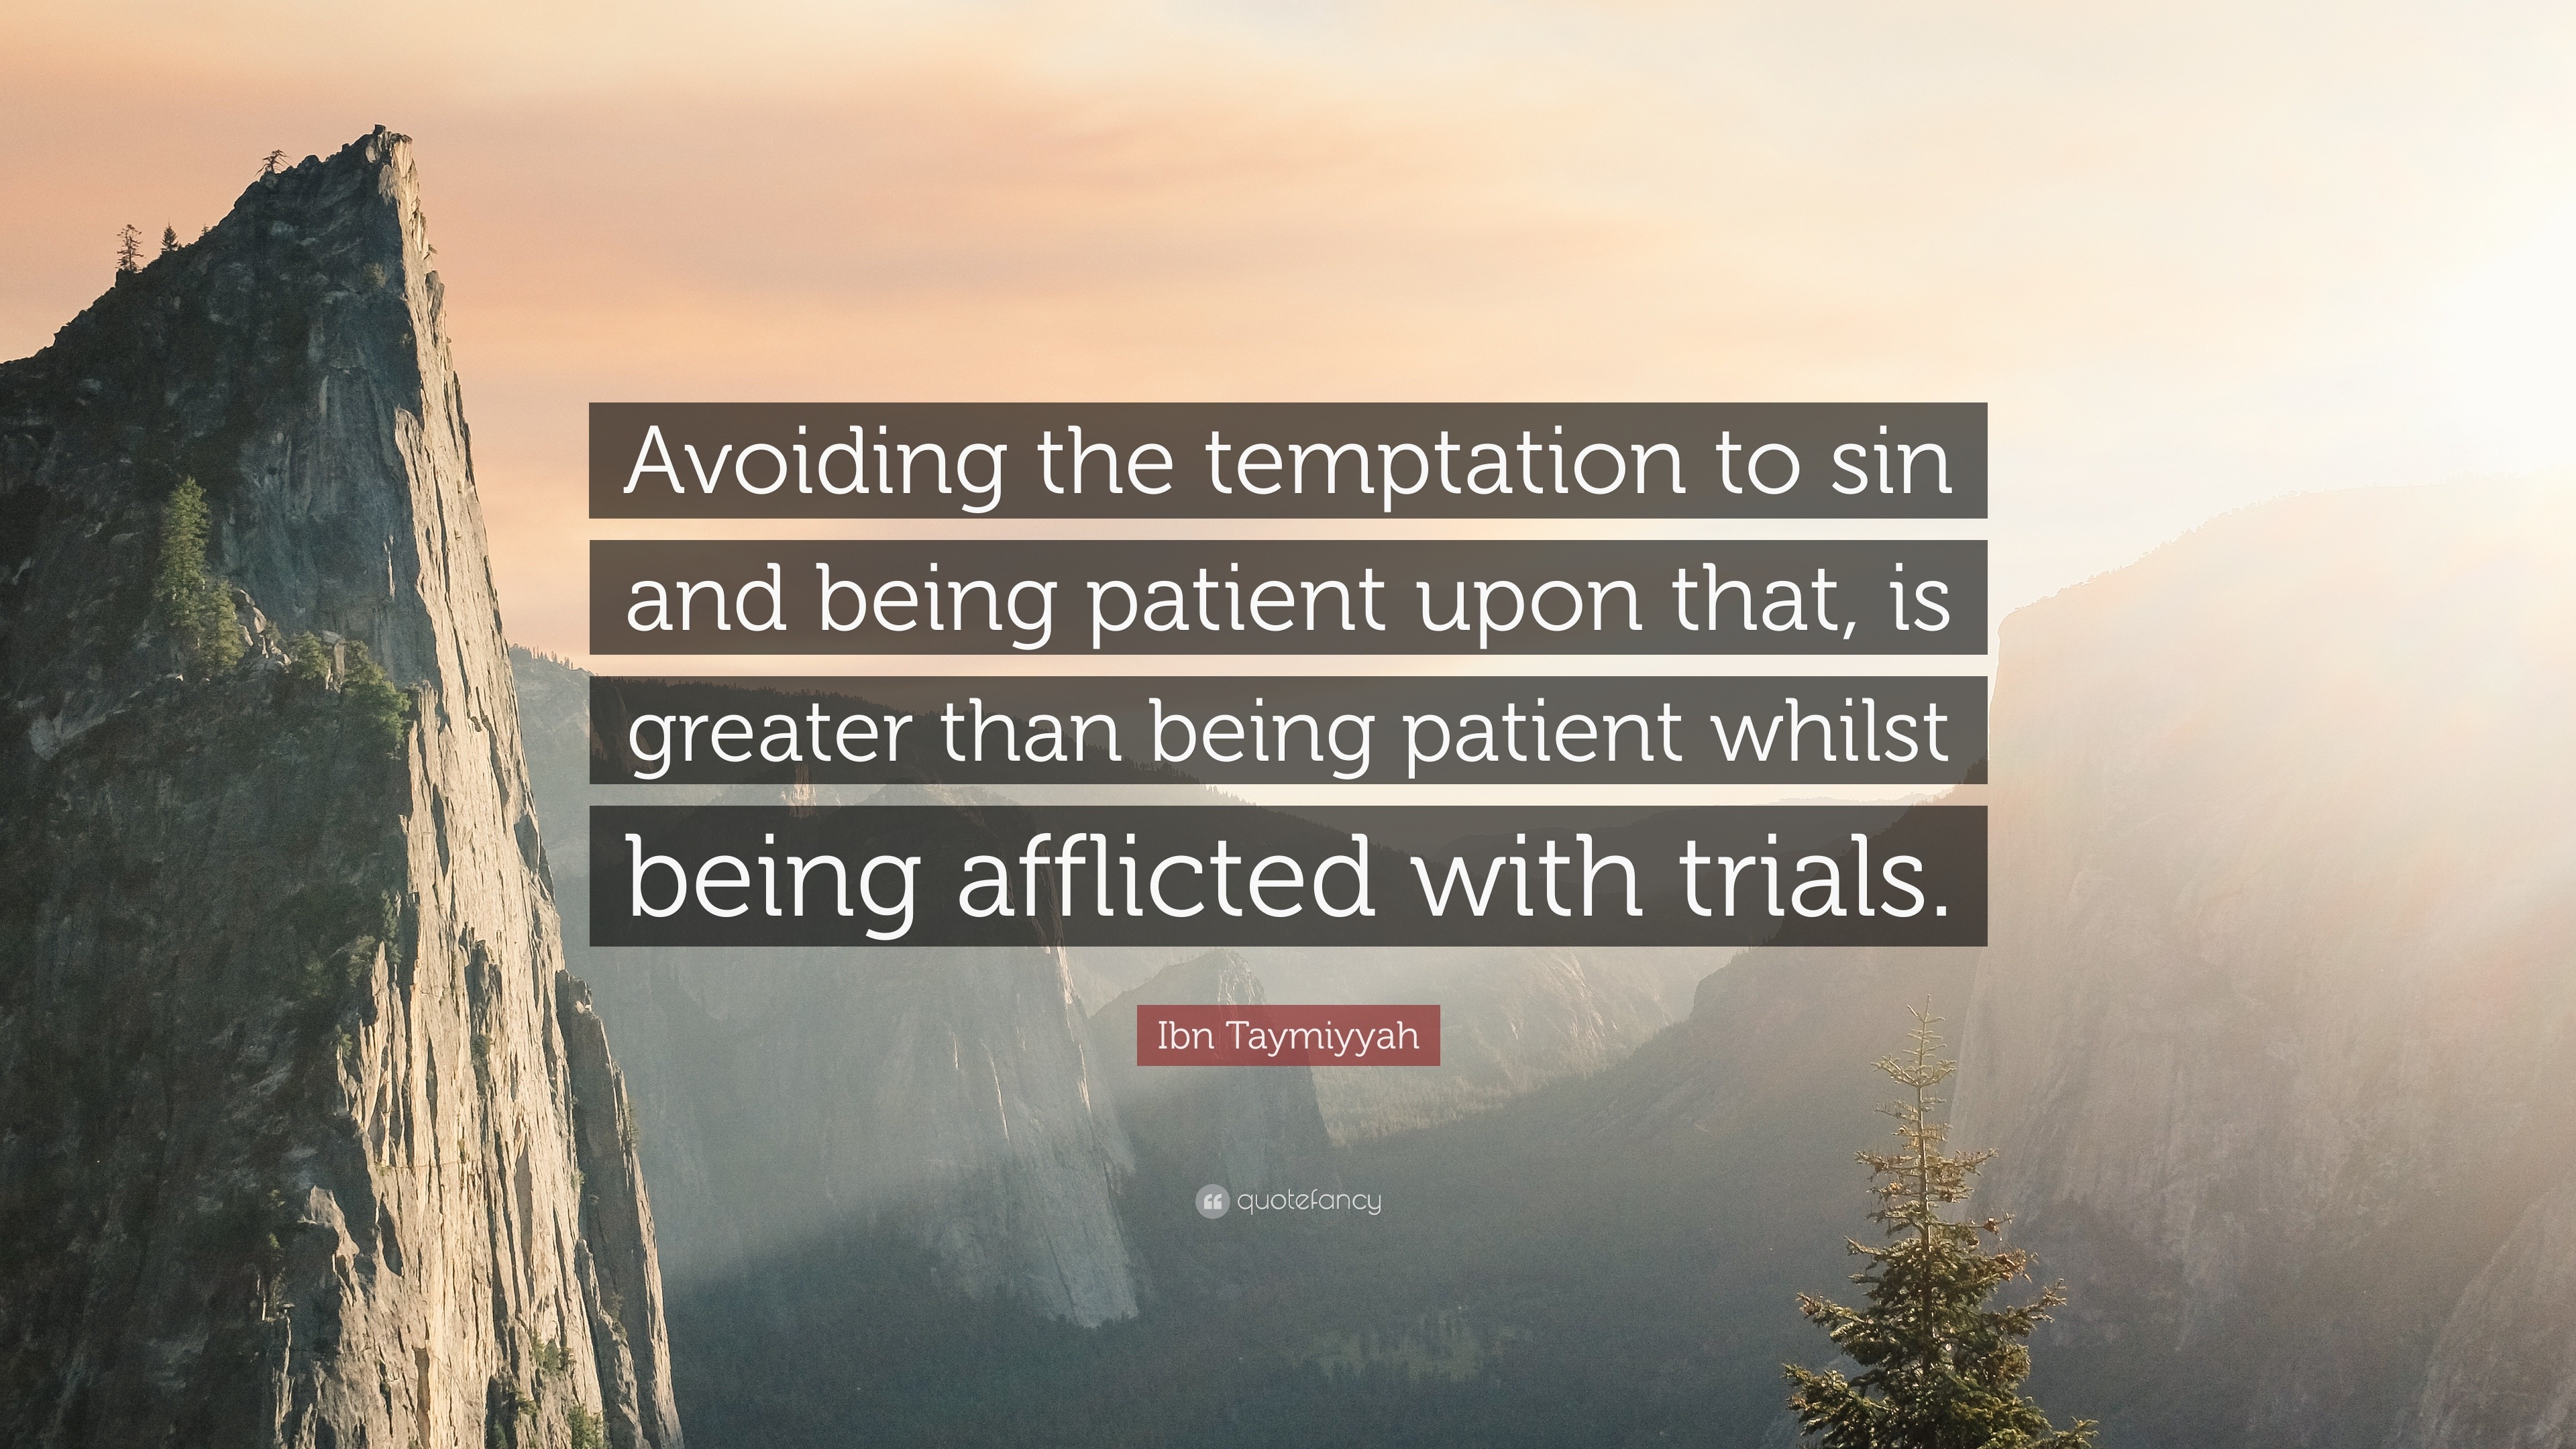 Ibn Taymiyyah Quotes (34 wallpapers) - Quotefancy